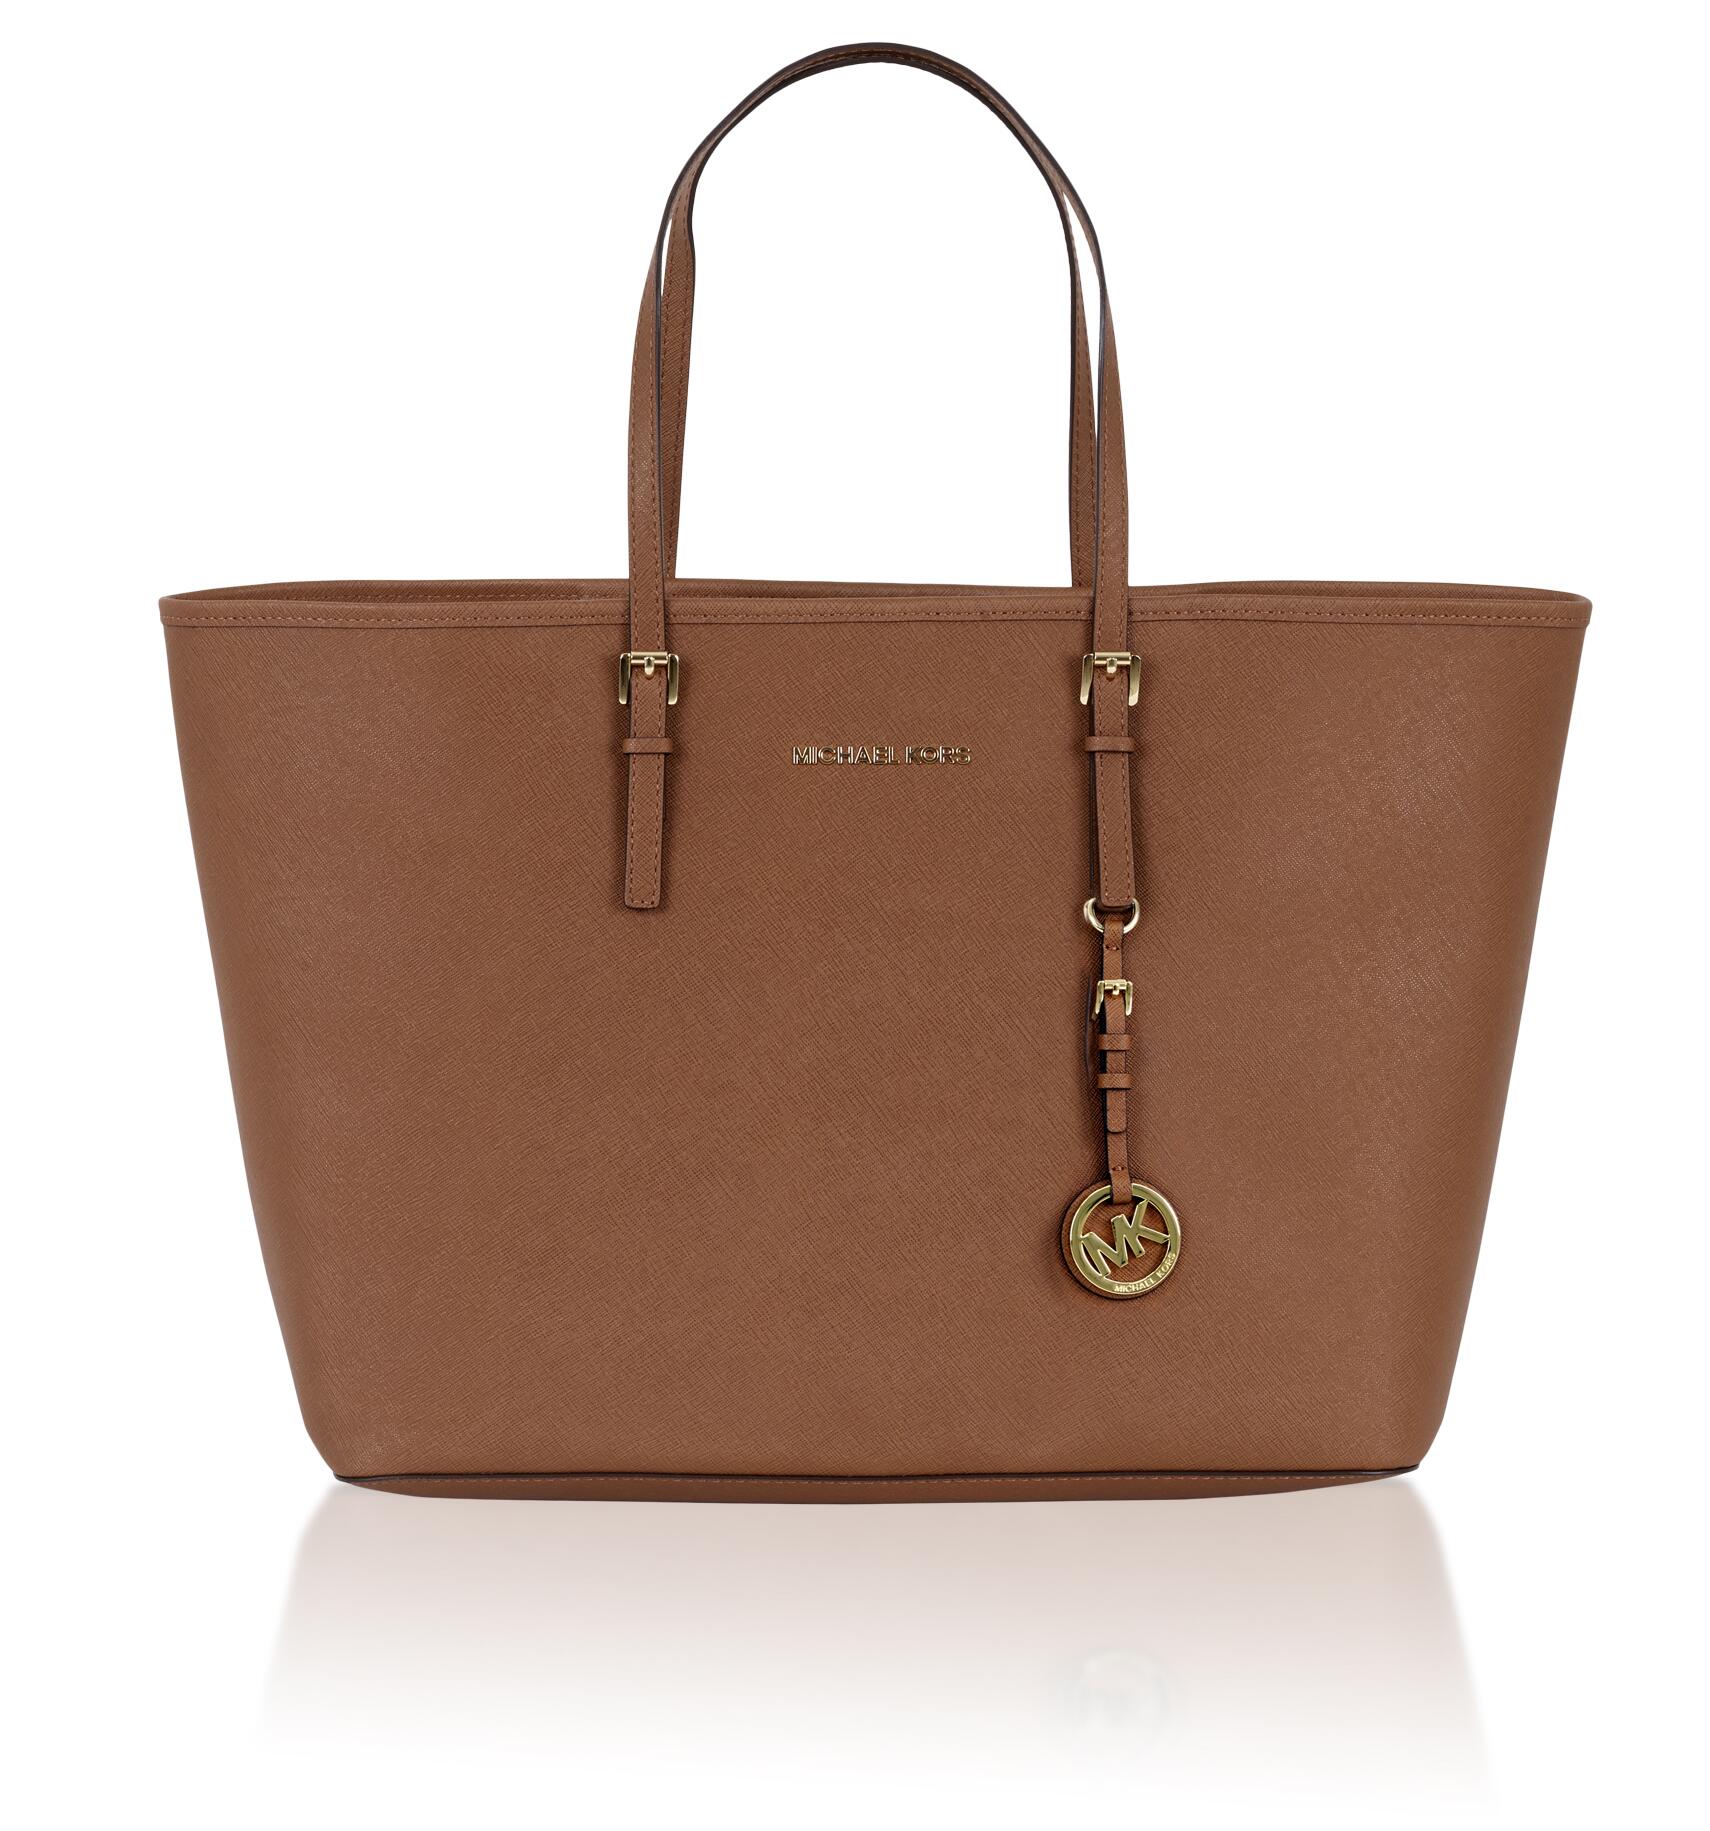 Brown Thomas on "#IconicBag pick for this season is the Classic Tan Michael Kors Jet Set http://t.co/G413i99ynh" Twitter